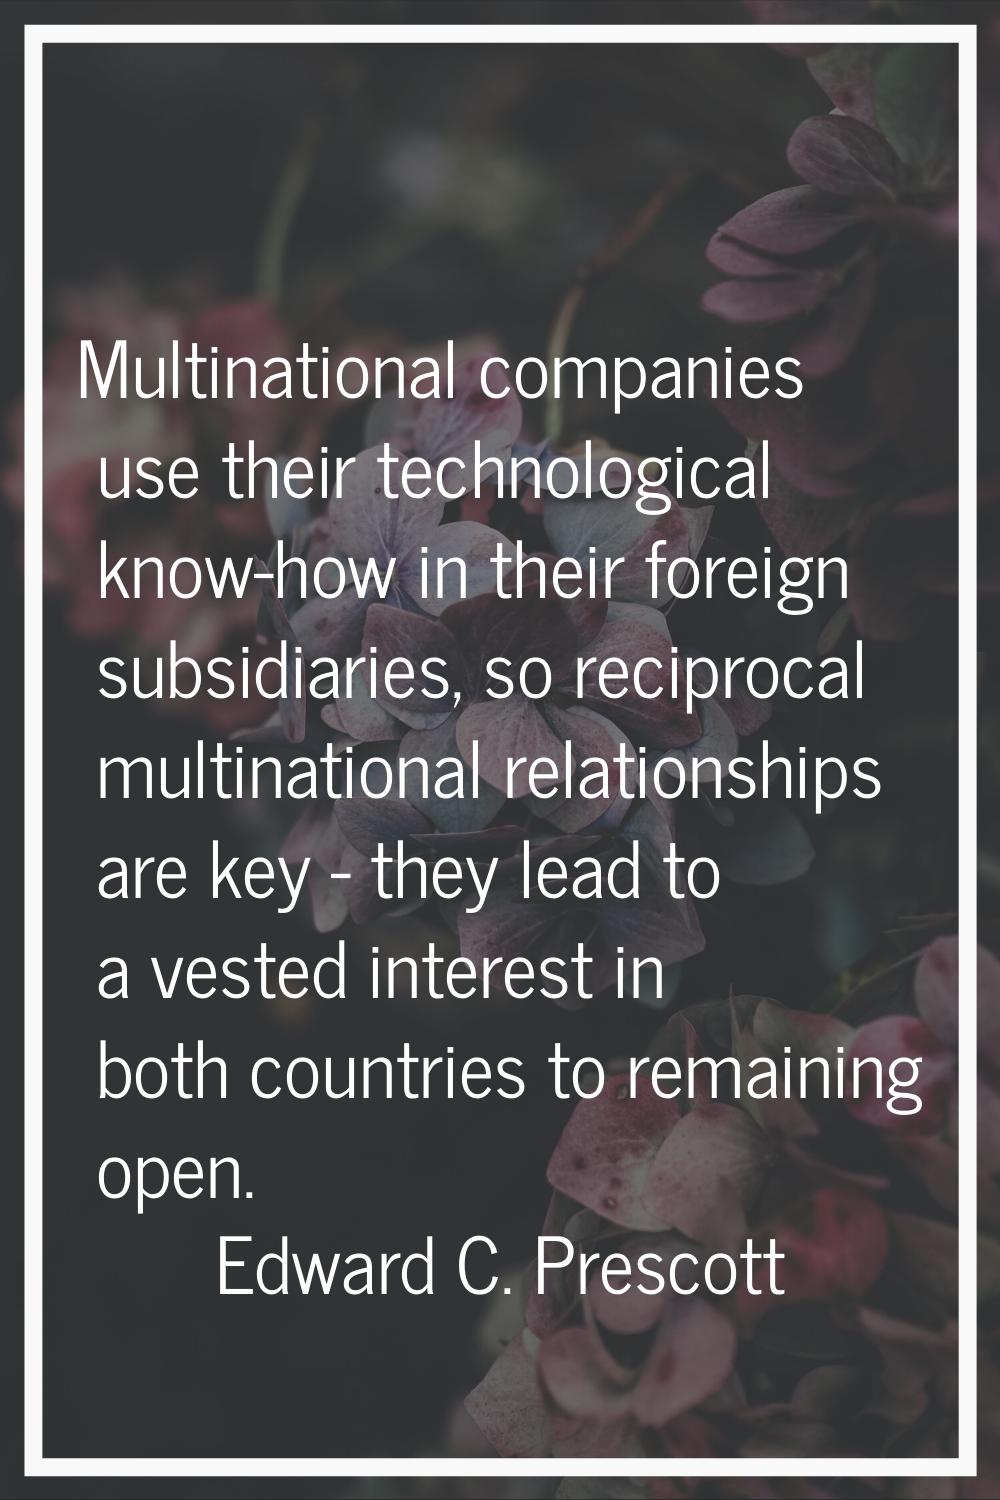 Multinational companies use their technological know-how in their foreign subsidiaries, so reciproc